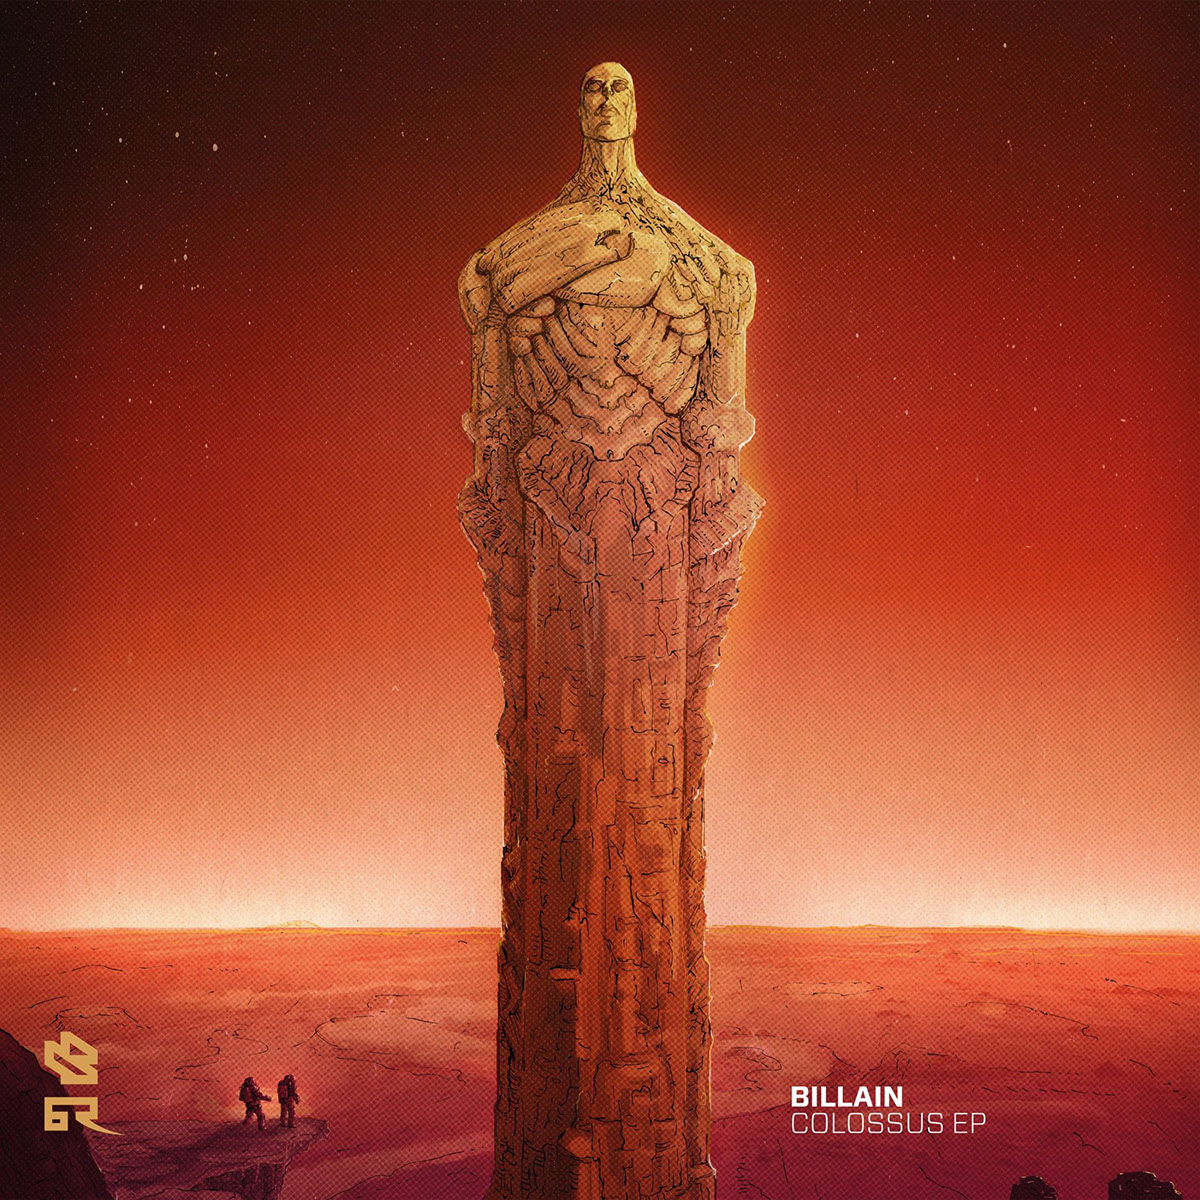 colossus billain Sci Fi ep vinyl Anlien cosmos planet Red Planet